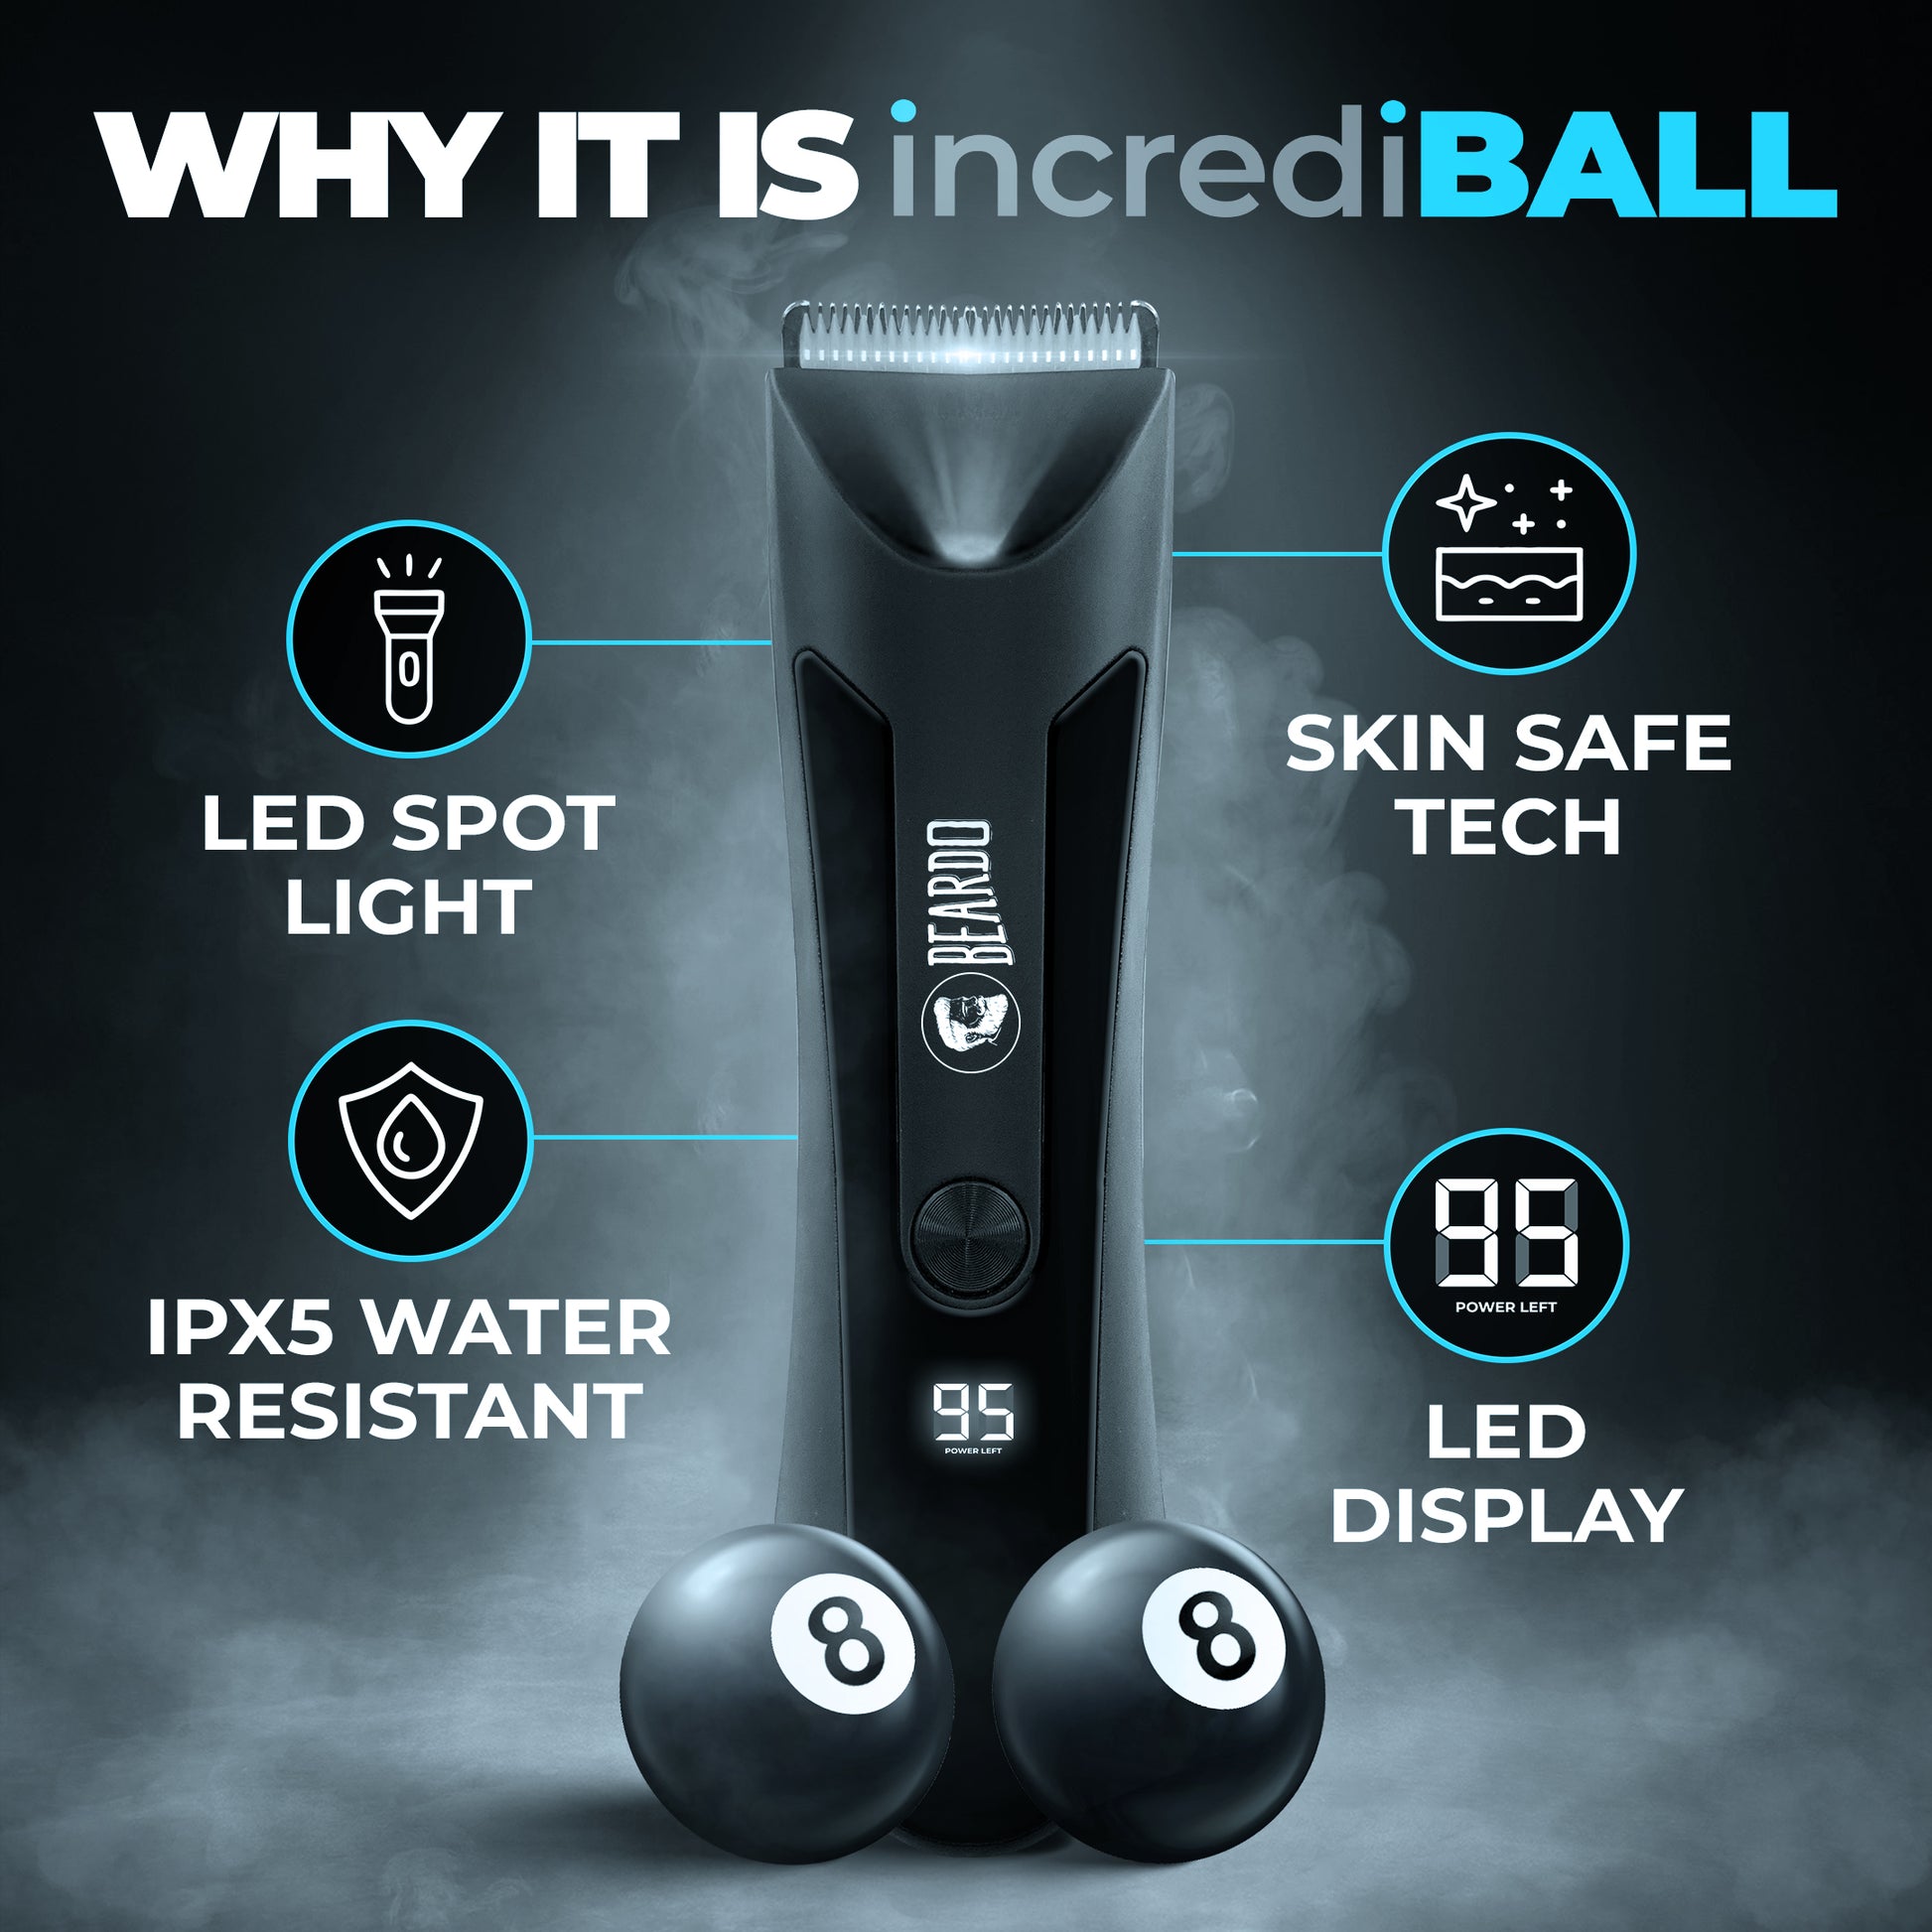 incrediball trimmer, trimmer for pubic hair, trim pubic hair, shave pubic hair in males, water resistant trimmer, skin safe